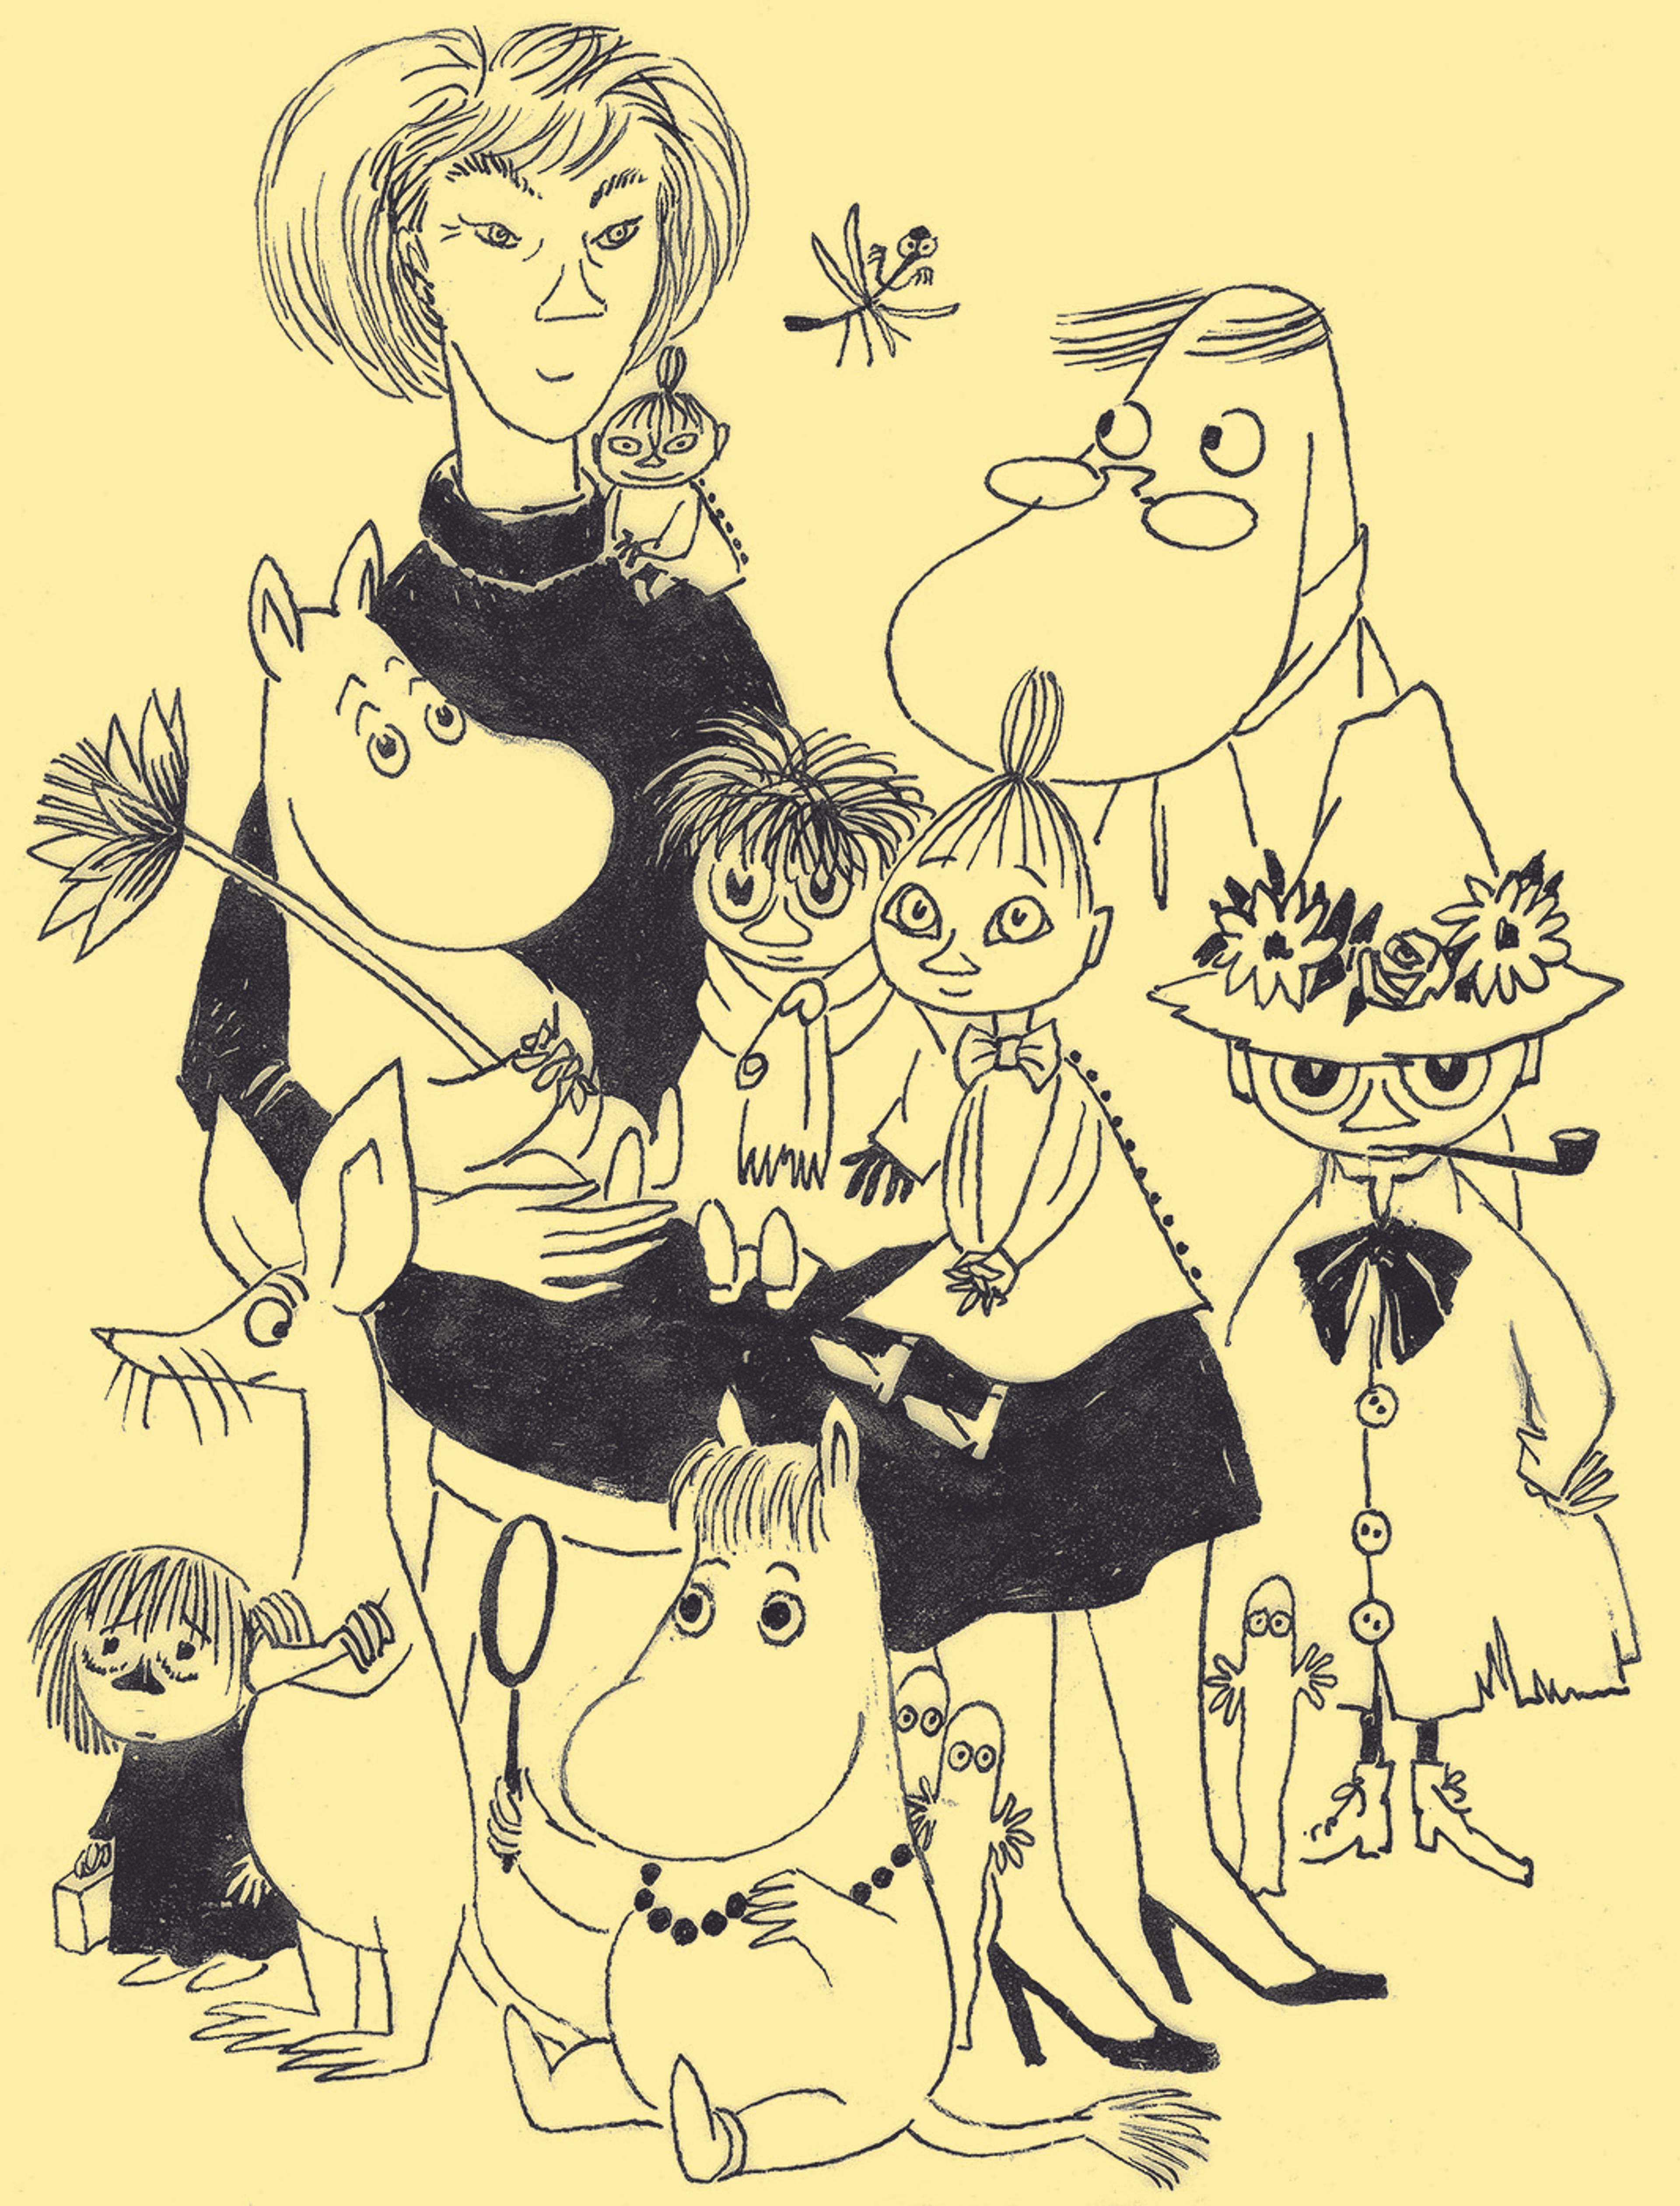 Black and white illustration of Tove Jansson with Moomin troll characters surrounding her and sitting in her lap